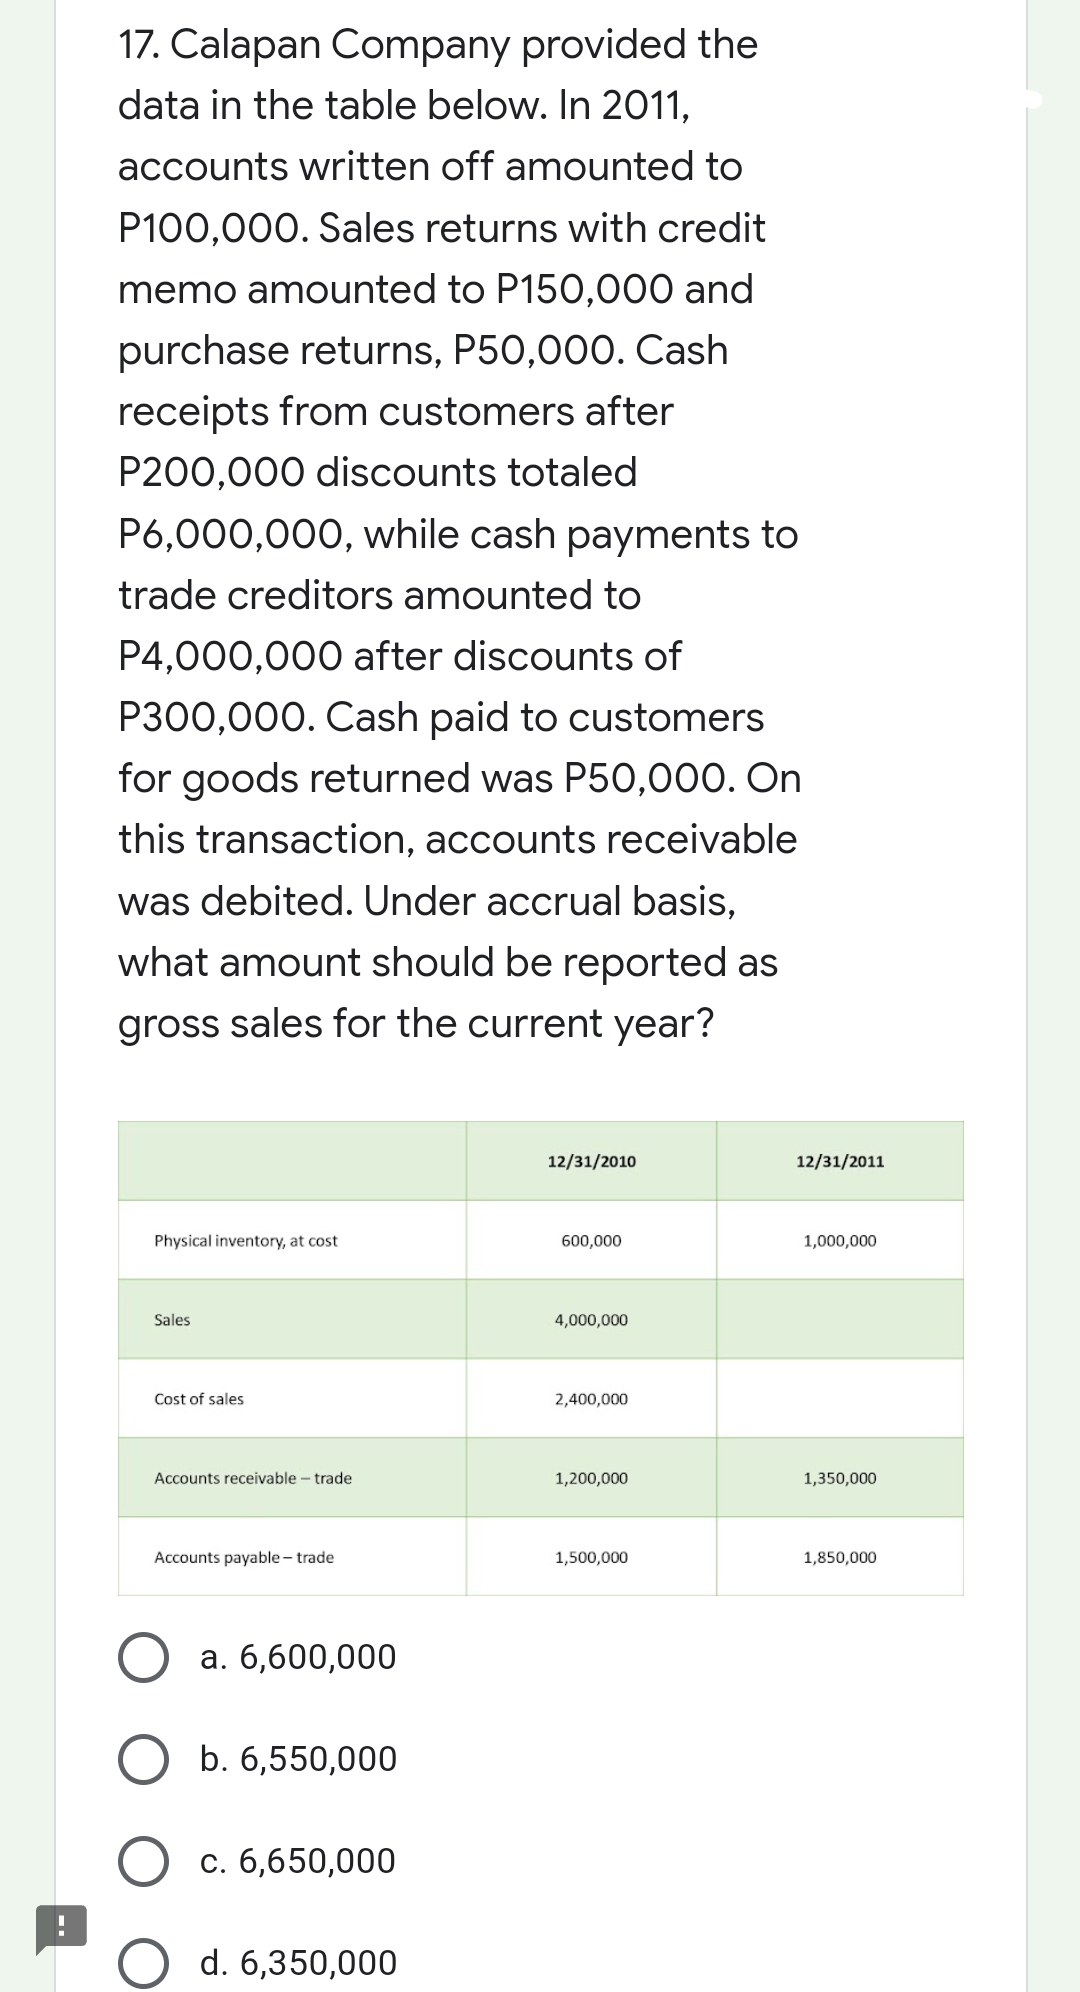 17. Calapan Company provided the
data in the table below. In 2011,
accounts written off amounted to
P100,000. Sales returns with credit
memo amounted to P150,000 and
purchase returns, P50,000. Cash
receipts from customers after
P200,000 discounts totaled
P6,000,000, while cash payments to
trade creditors amounted to
P4,000,000 after discounts of
P300,000. Cash paid to customers
for goods returned was P50,000. On
this transaction, accounts receivable
was debited. Under accrual basis,
what amount should be reported as
gross sales for the current year?
12/31/2010
Physical inventory, at cost
600,000
Sales
4,000,000
Cost of sales
2,400,000
Accounts receivable - trade
1,200,000
Accounts payable - trade
1,500,000
a. 6,600,000
b. 6,550,000
c. 6,650,000
d. 6,350,000
12/31/2011
1,000,000
1,350,000
1,850,000